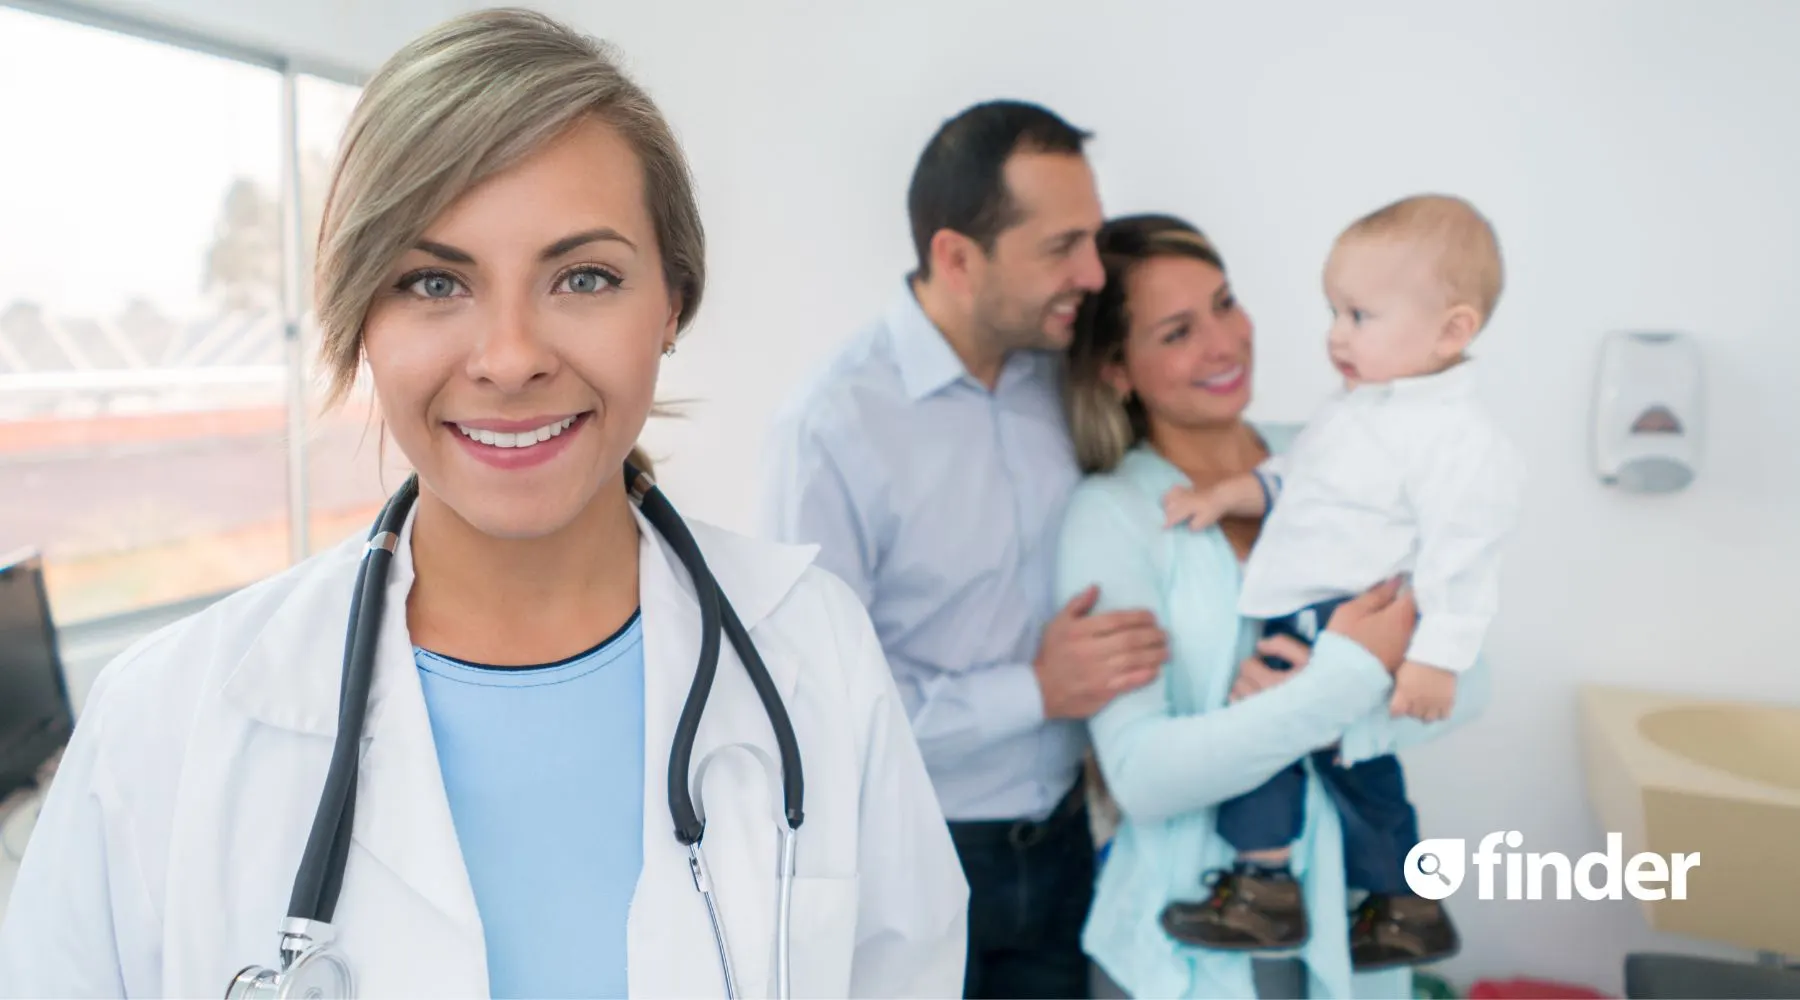 Family_Healthcare_Visit_Canva_1800x1000